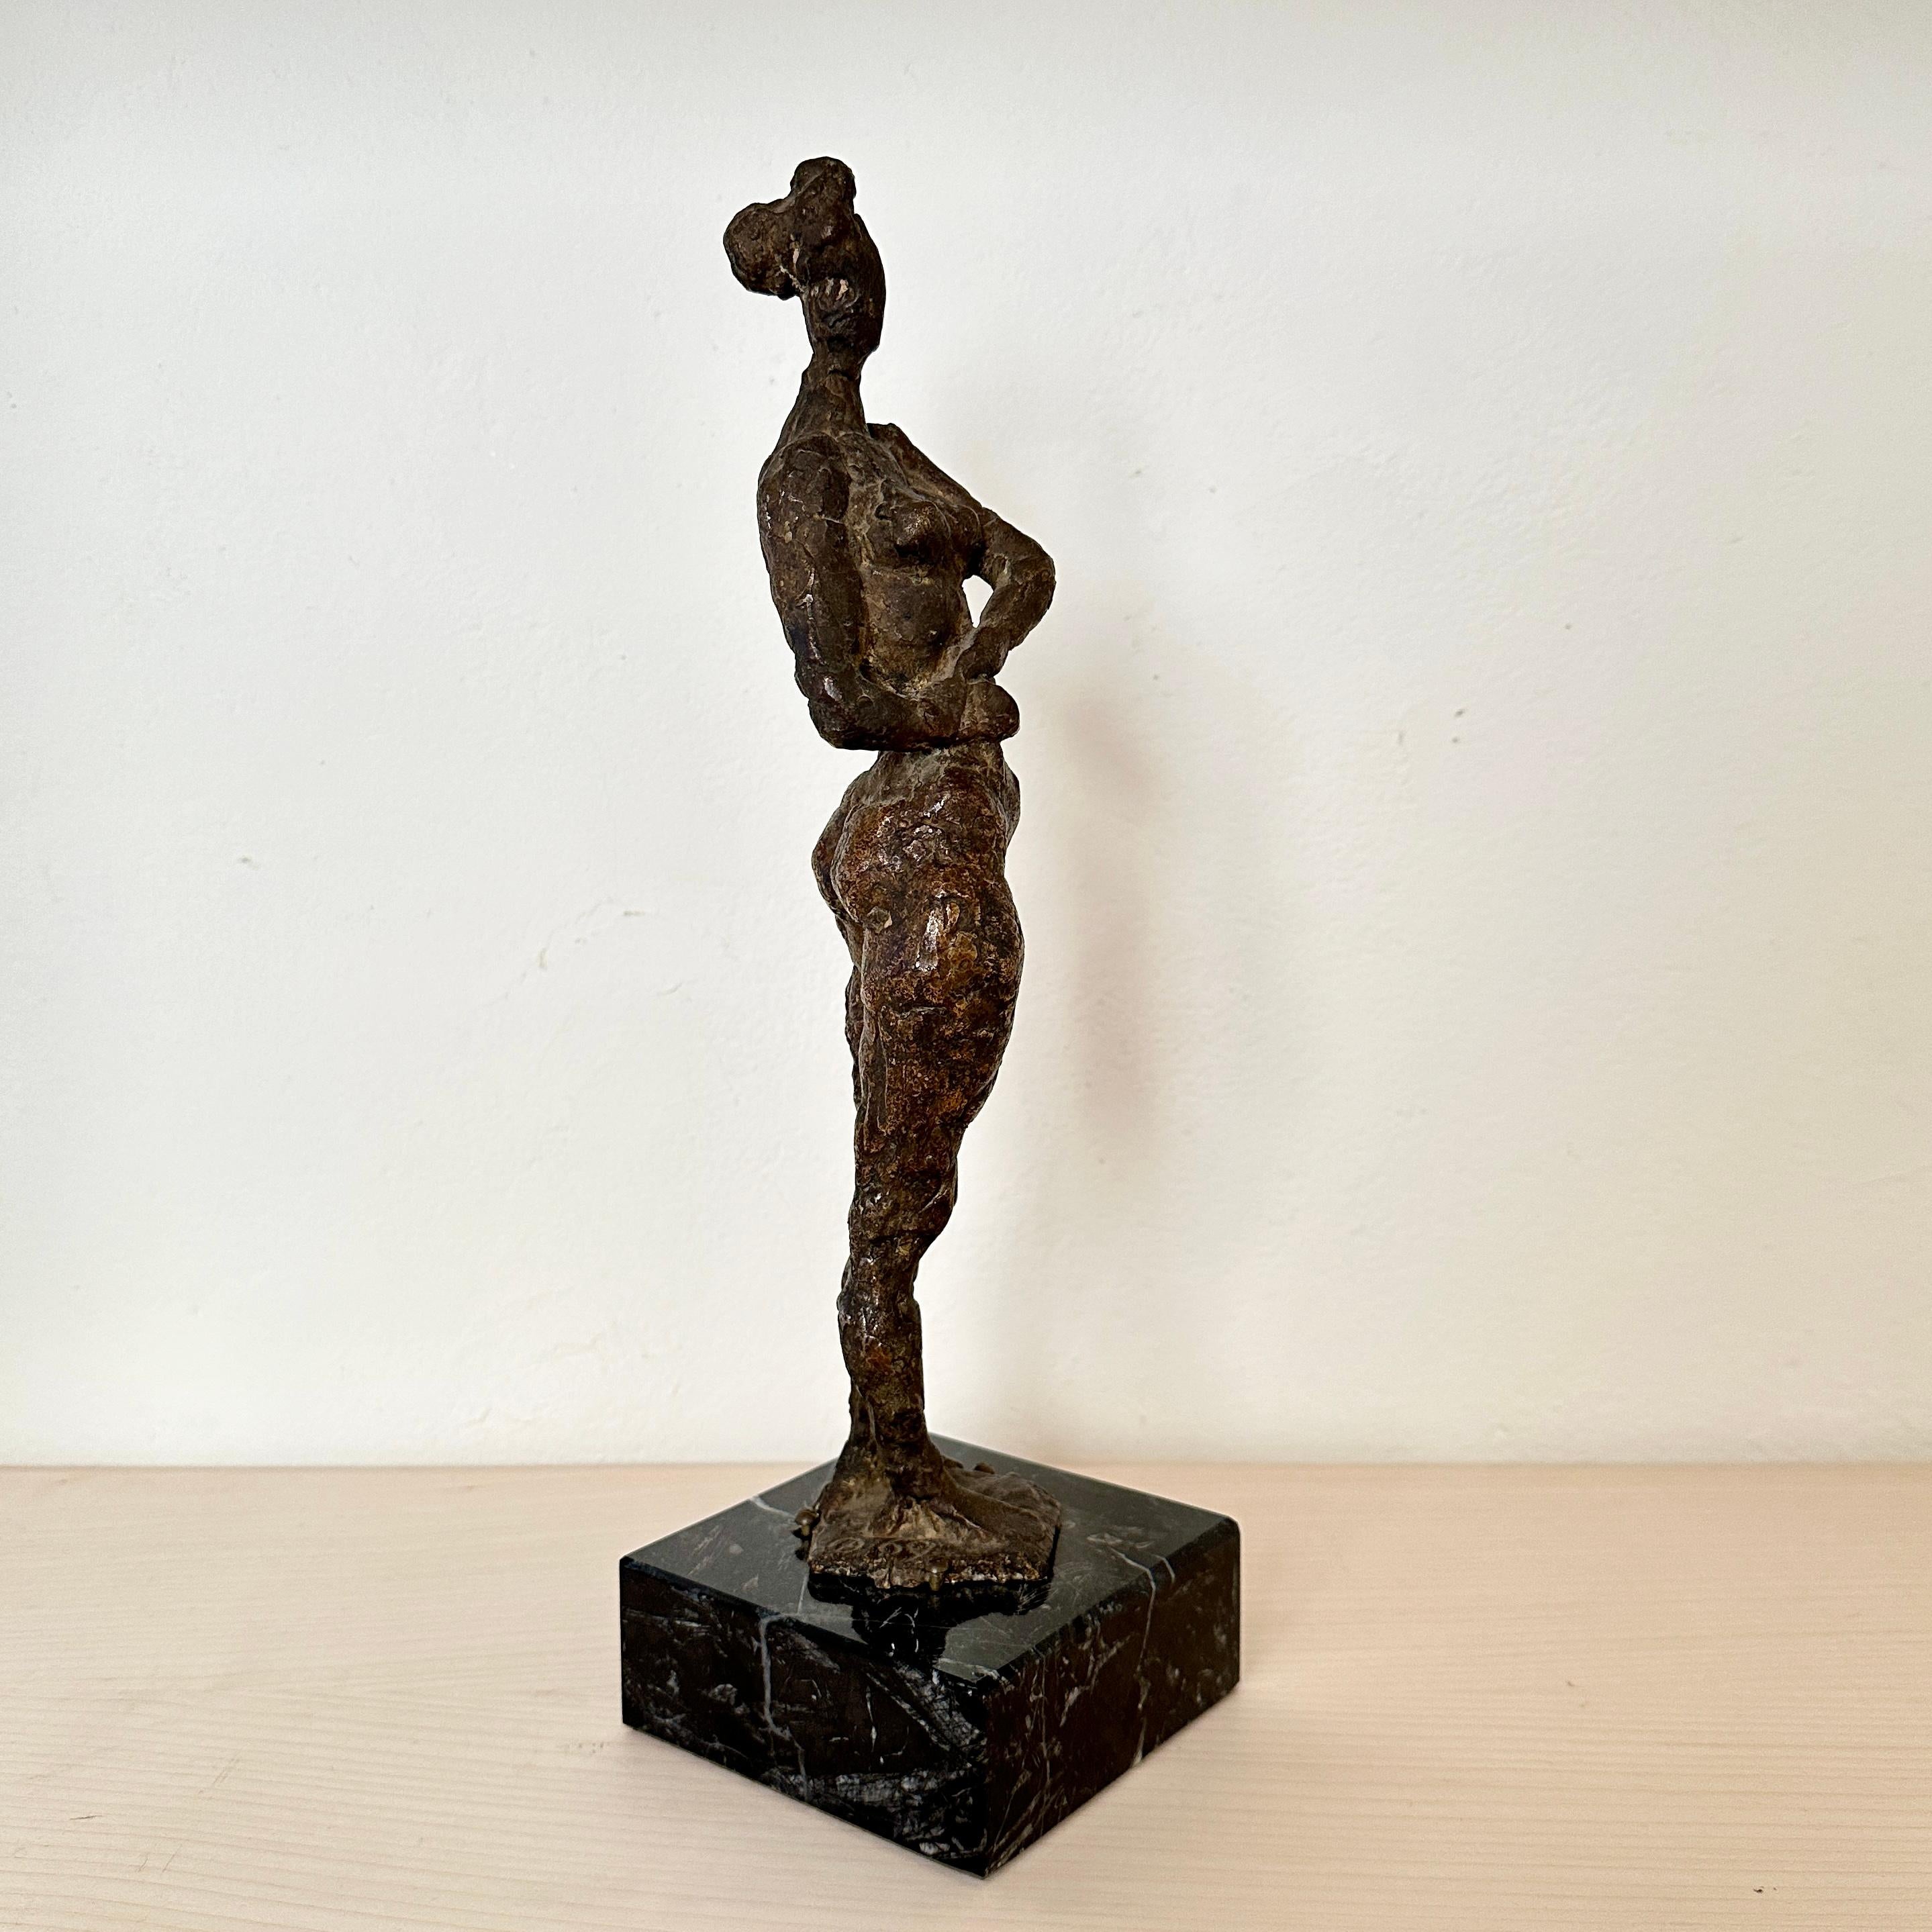 Small Cast Bronze Woman Sculpture by Oskar Bottoli on a Black Marble Stand, 1969 For Sale 10